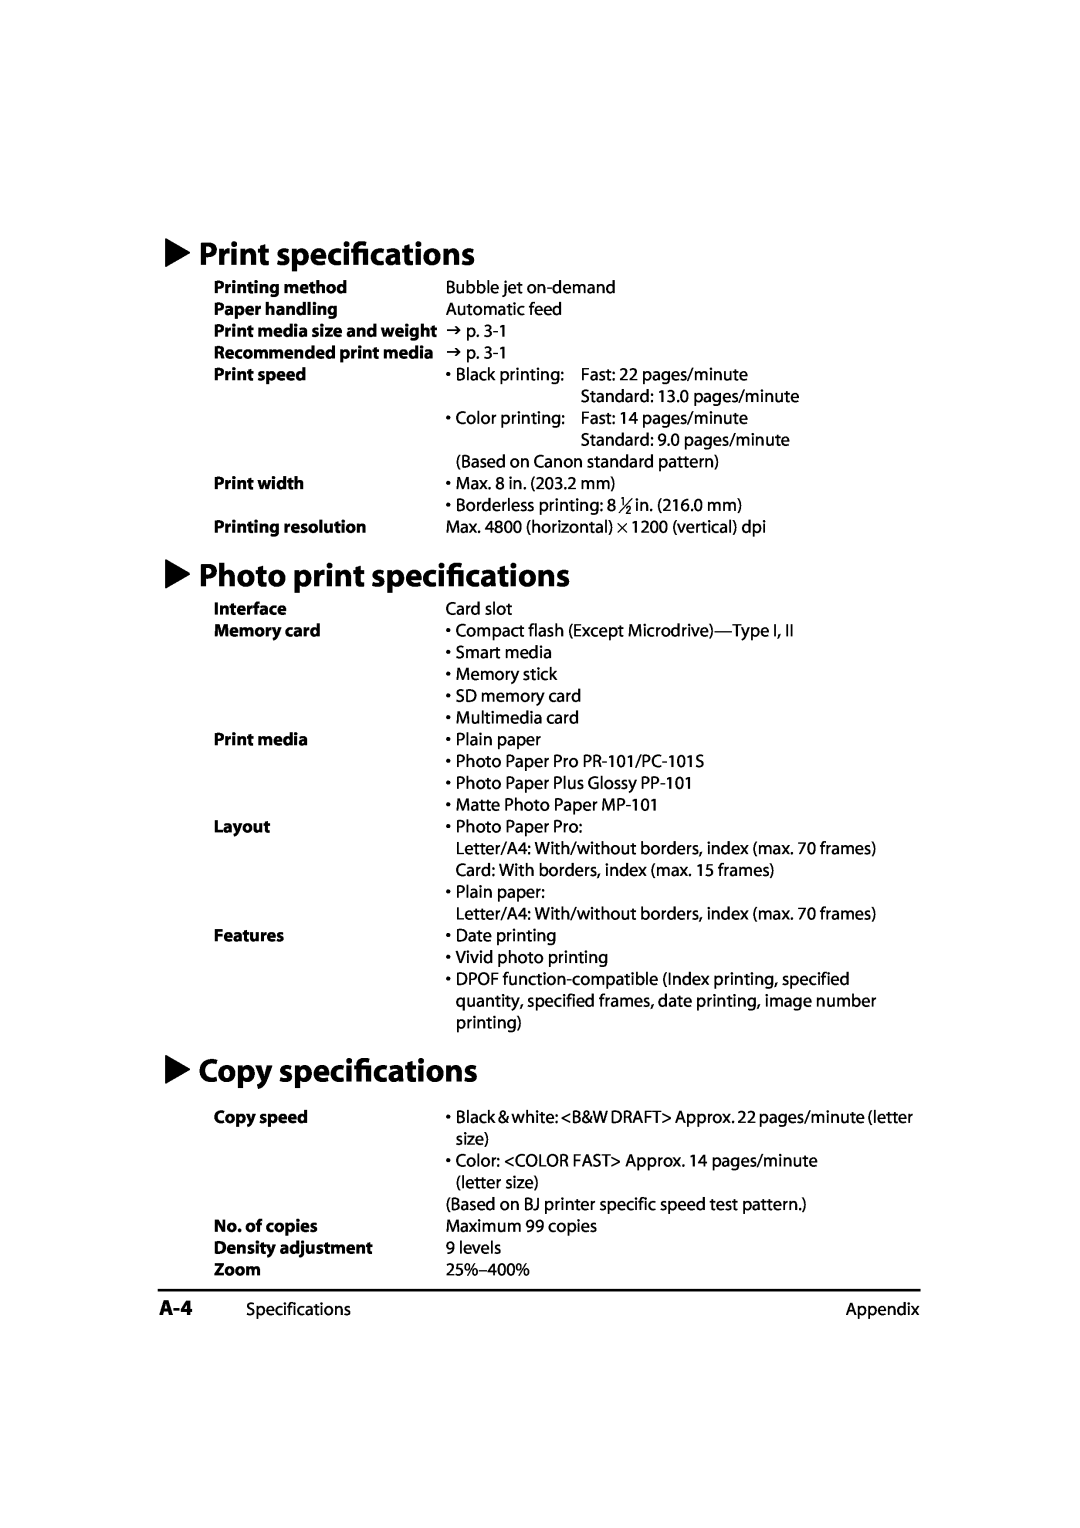 Canon MultiPASS MP730 Print speciﬁcations, Photo print speciﬁcations, Copy speciﬁcations, Printing method, Paper handling 